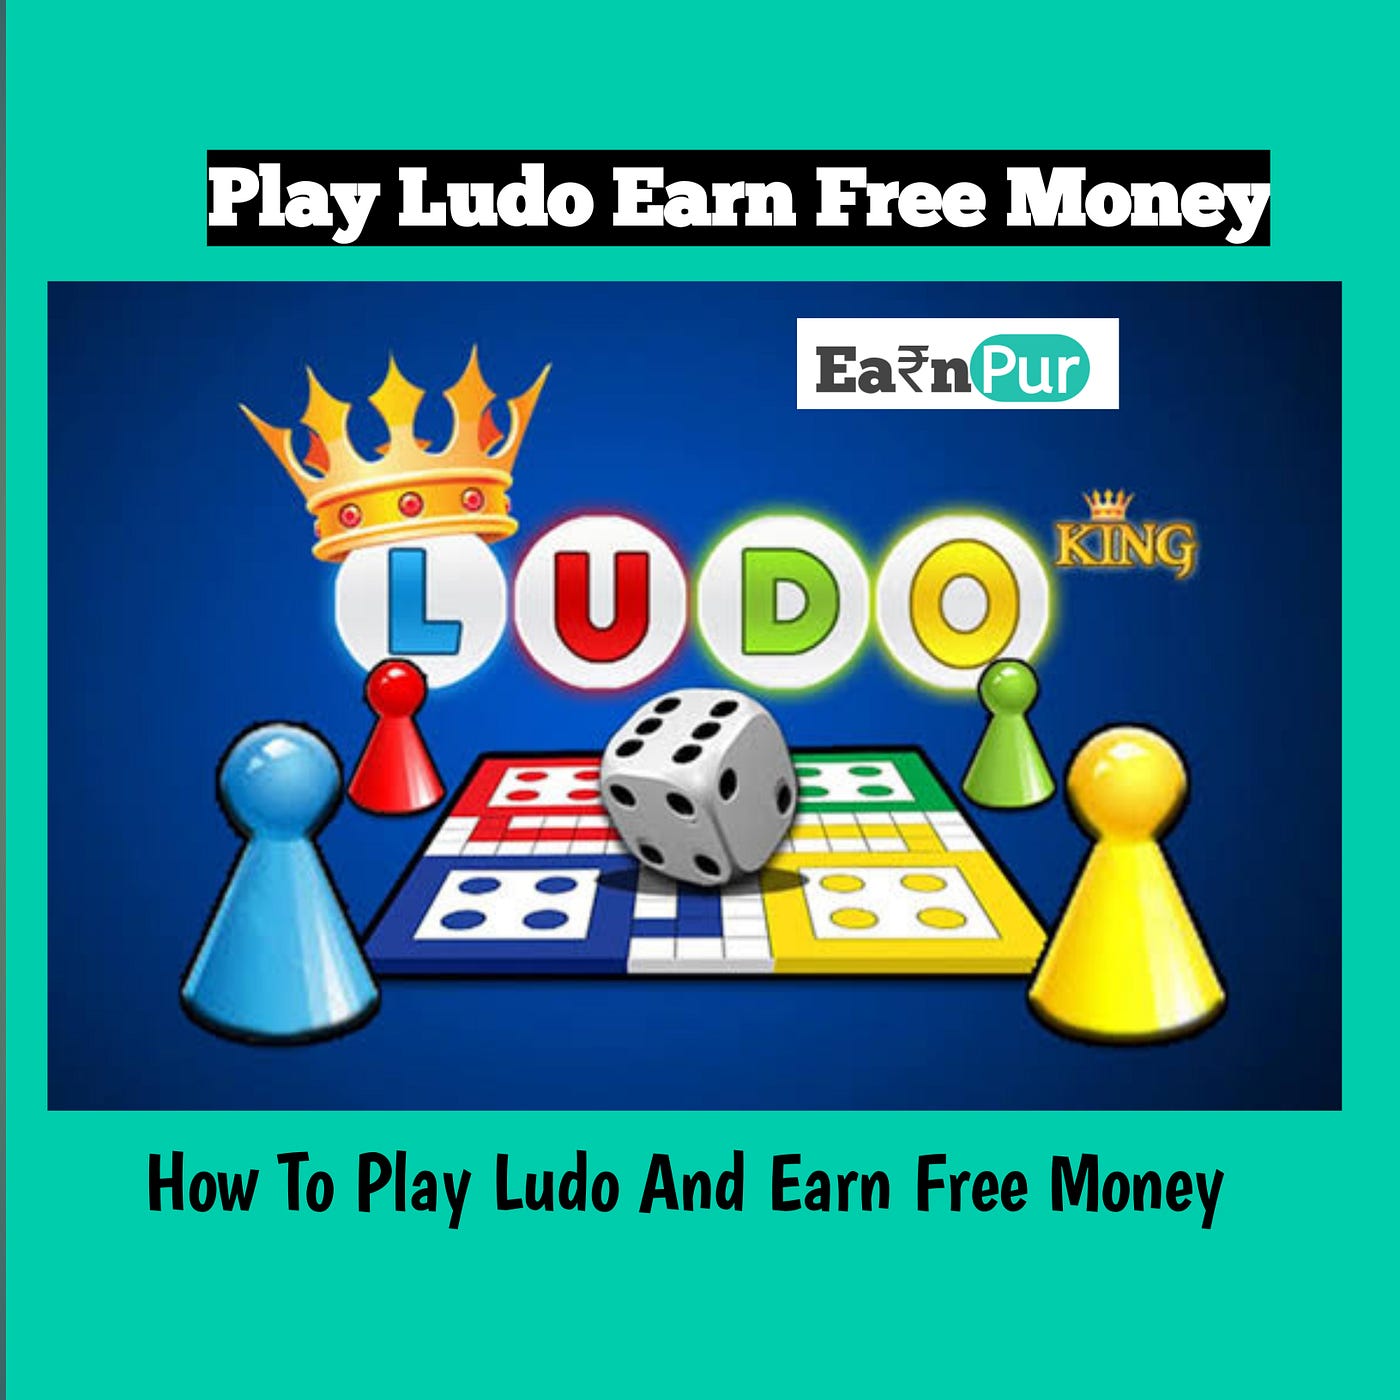 Which Are The Best Ludo Apps To Play Ludo & Win Cash Online?